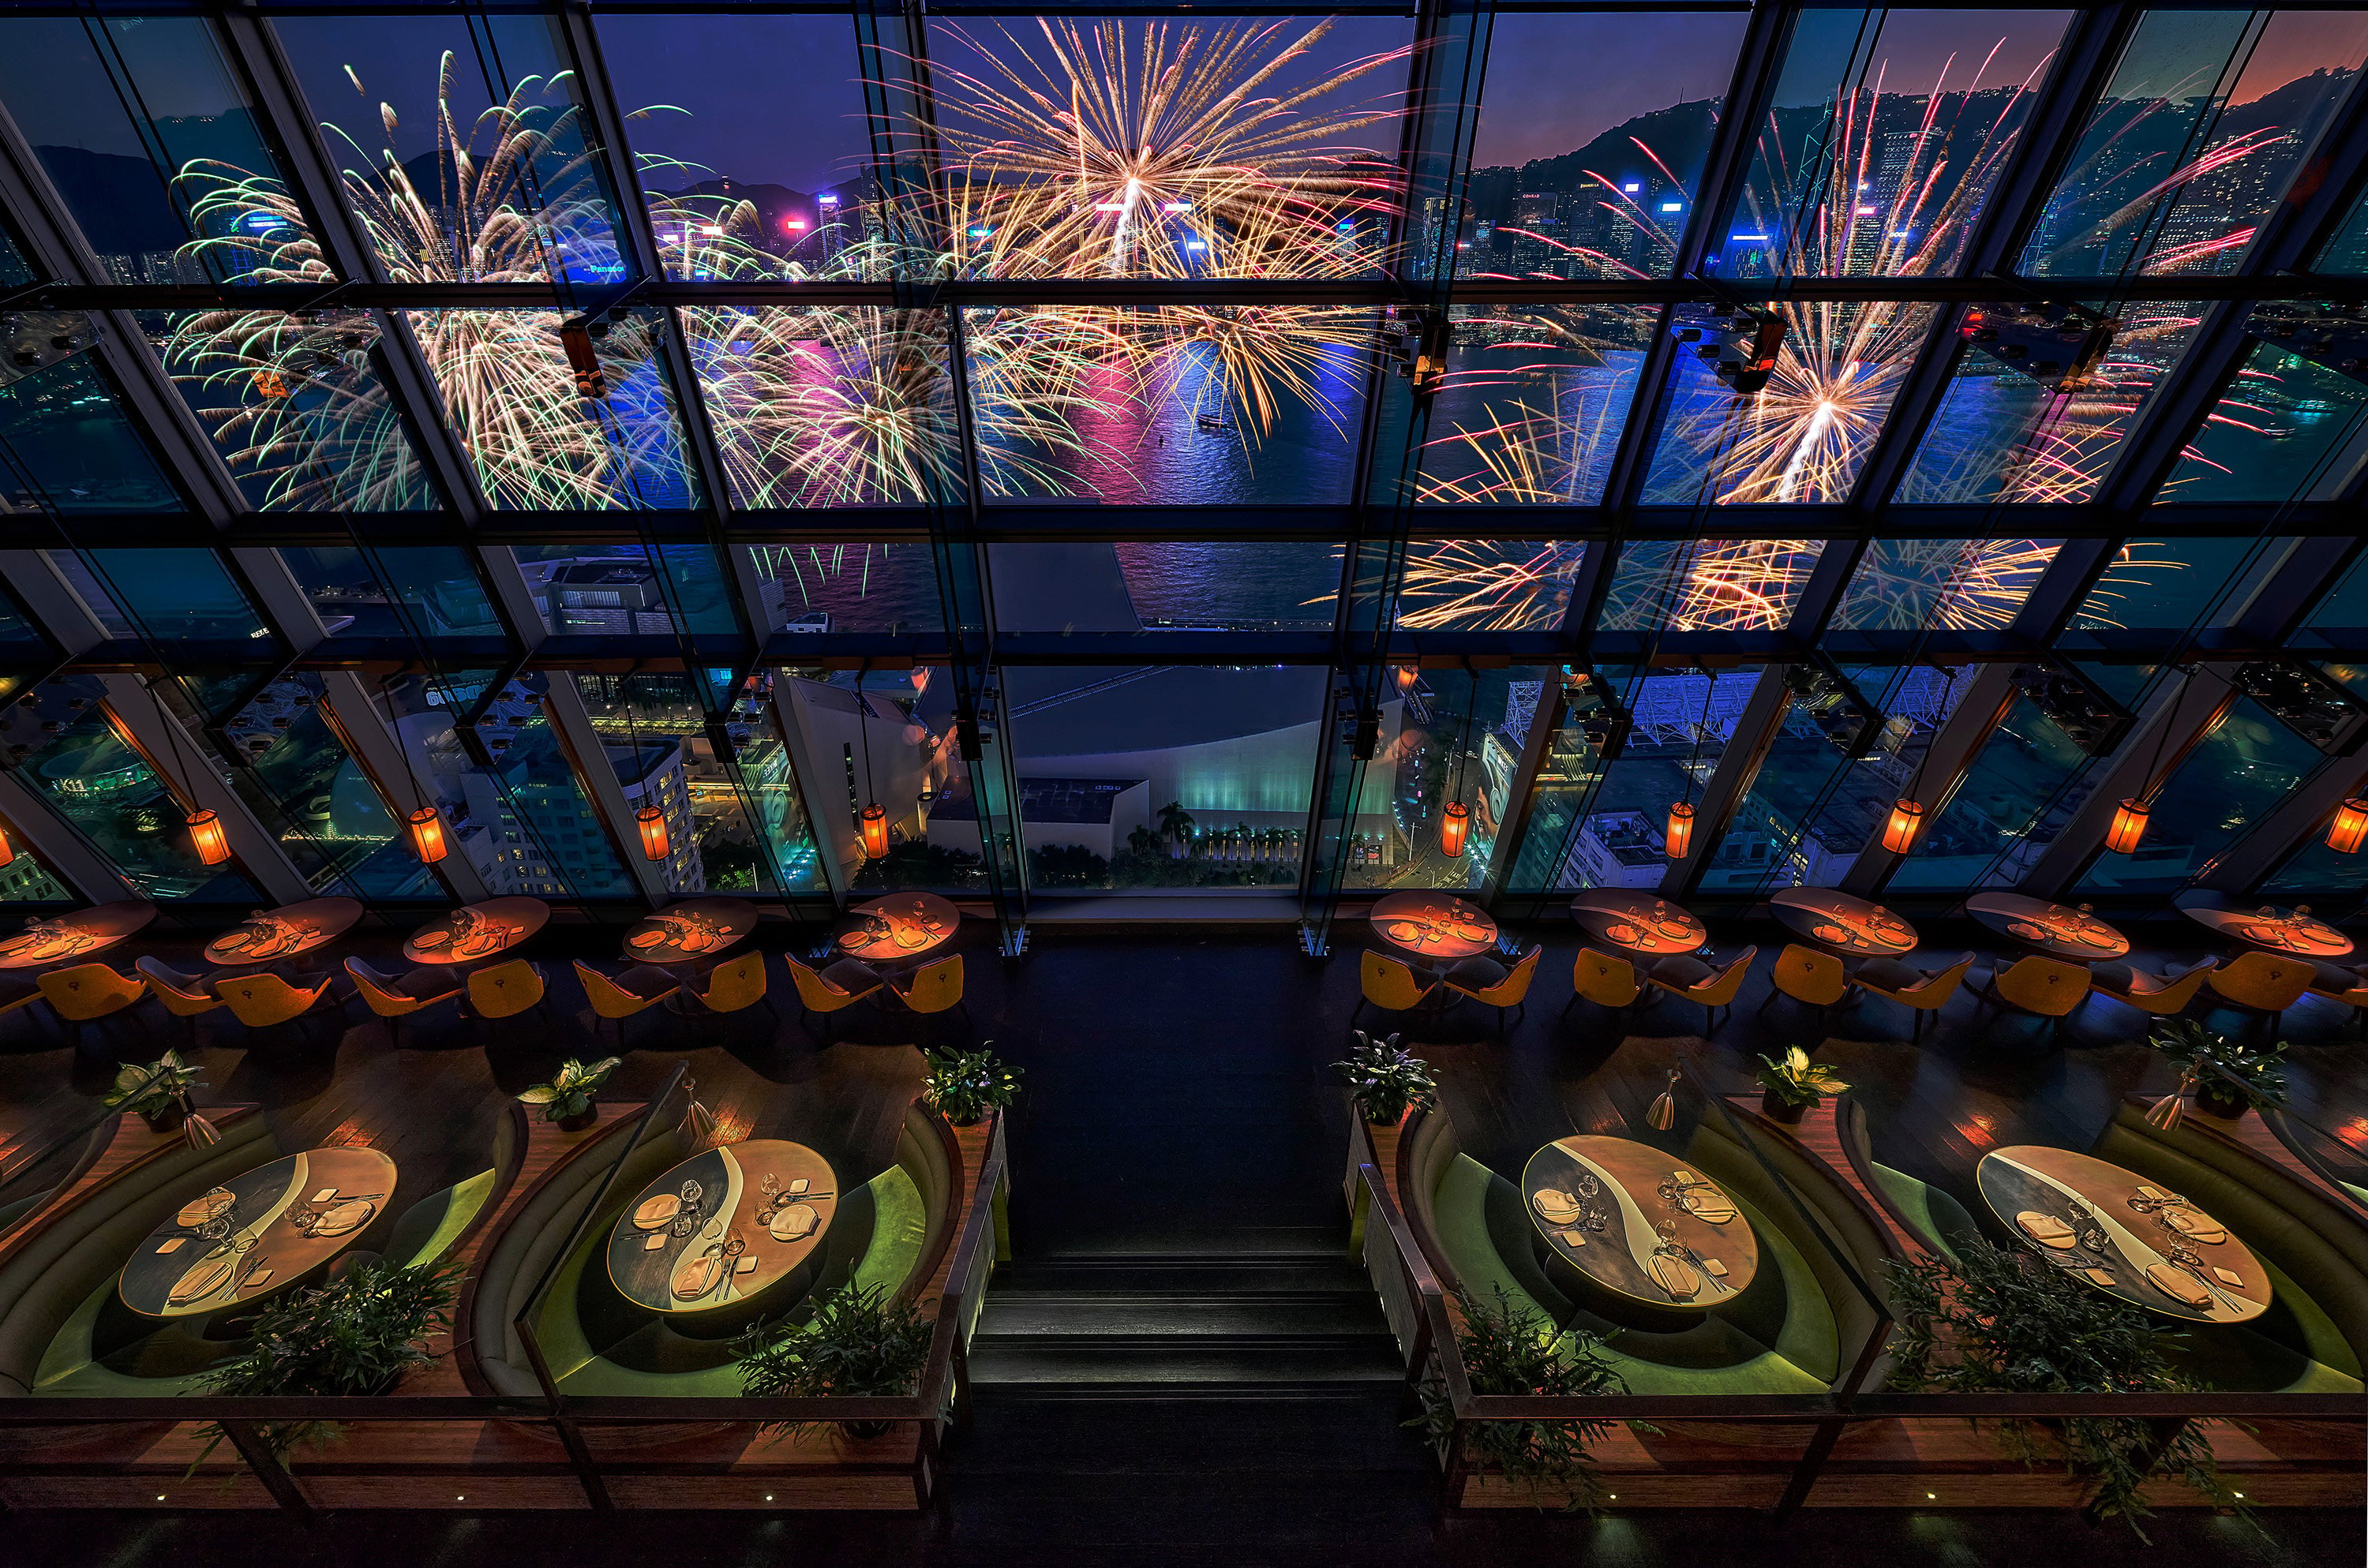 Partygoers at Vista Italian restaurant will enjoy unrivalled views of the New Year’s Eve fireworks. Photos: Handouts